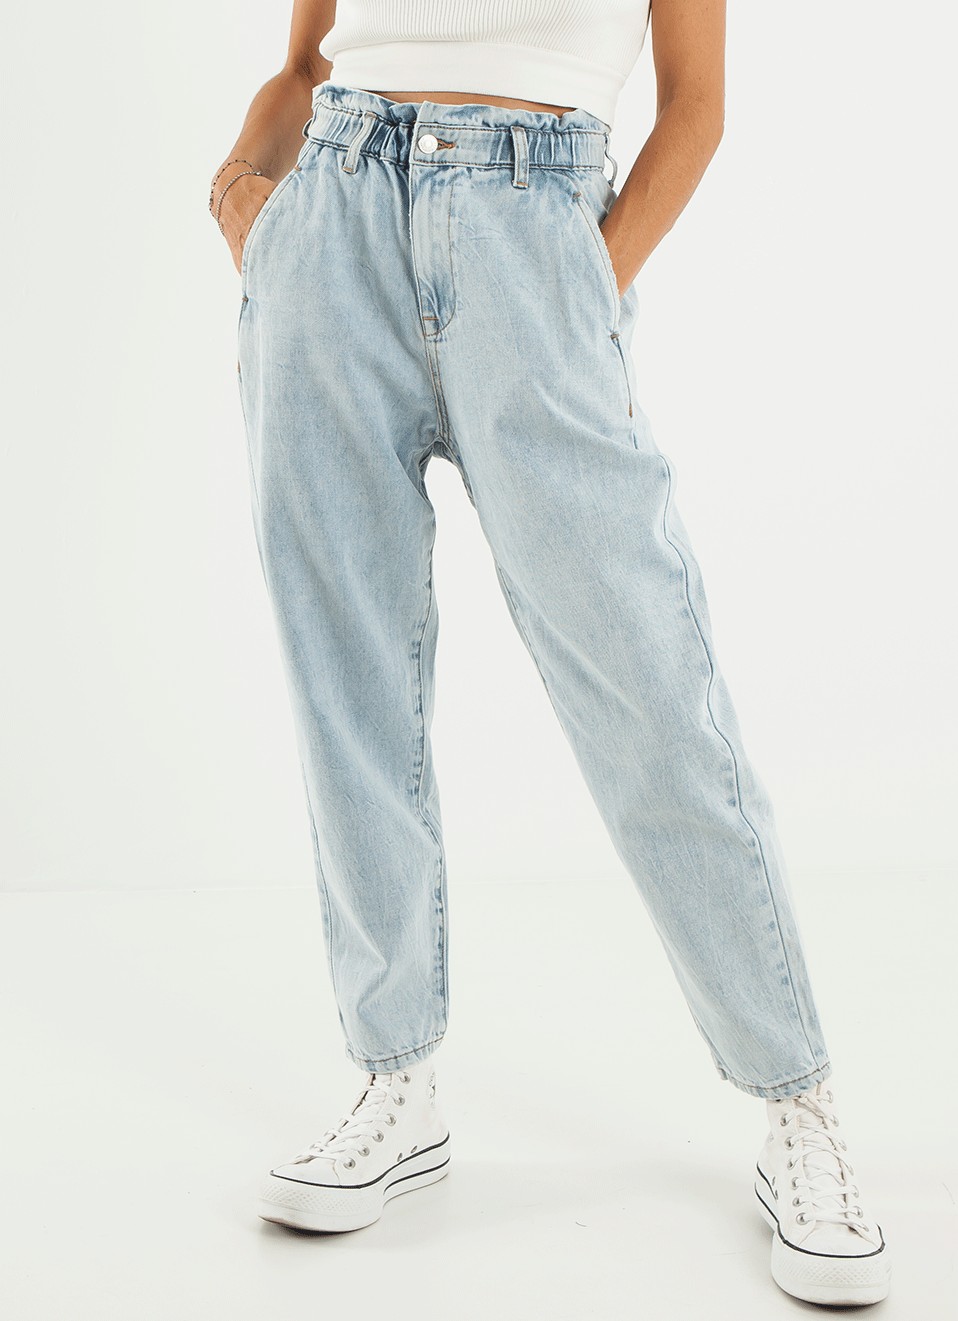 jeans slouchy